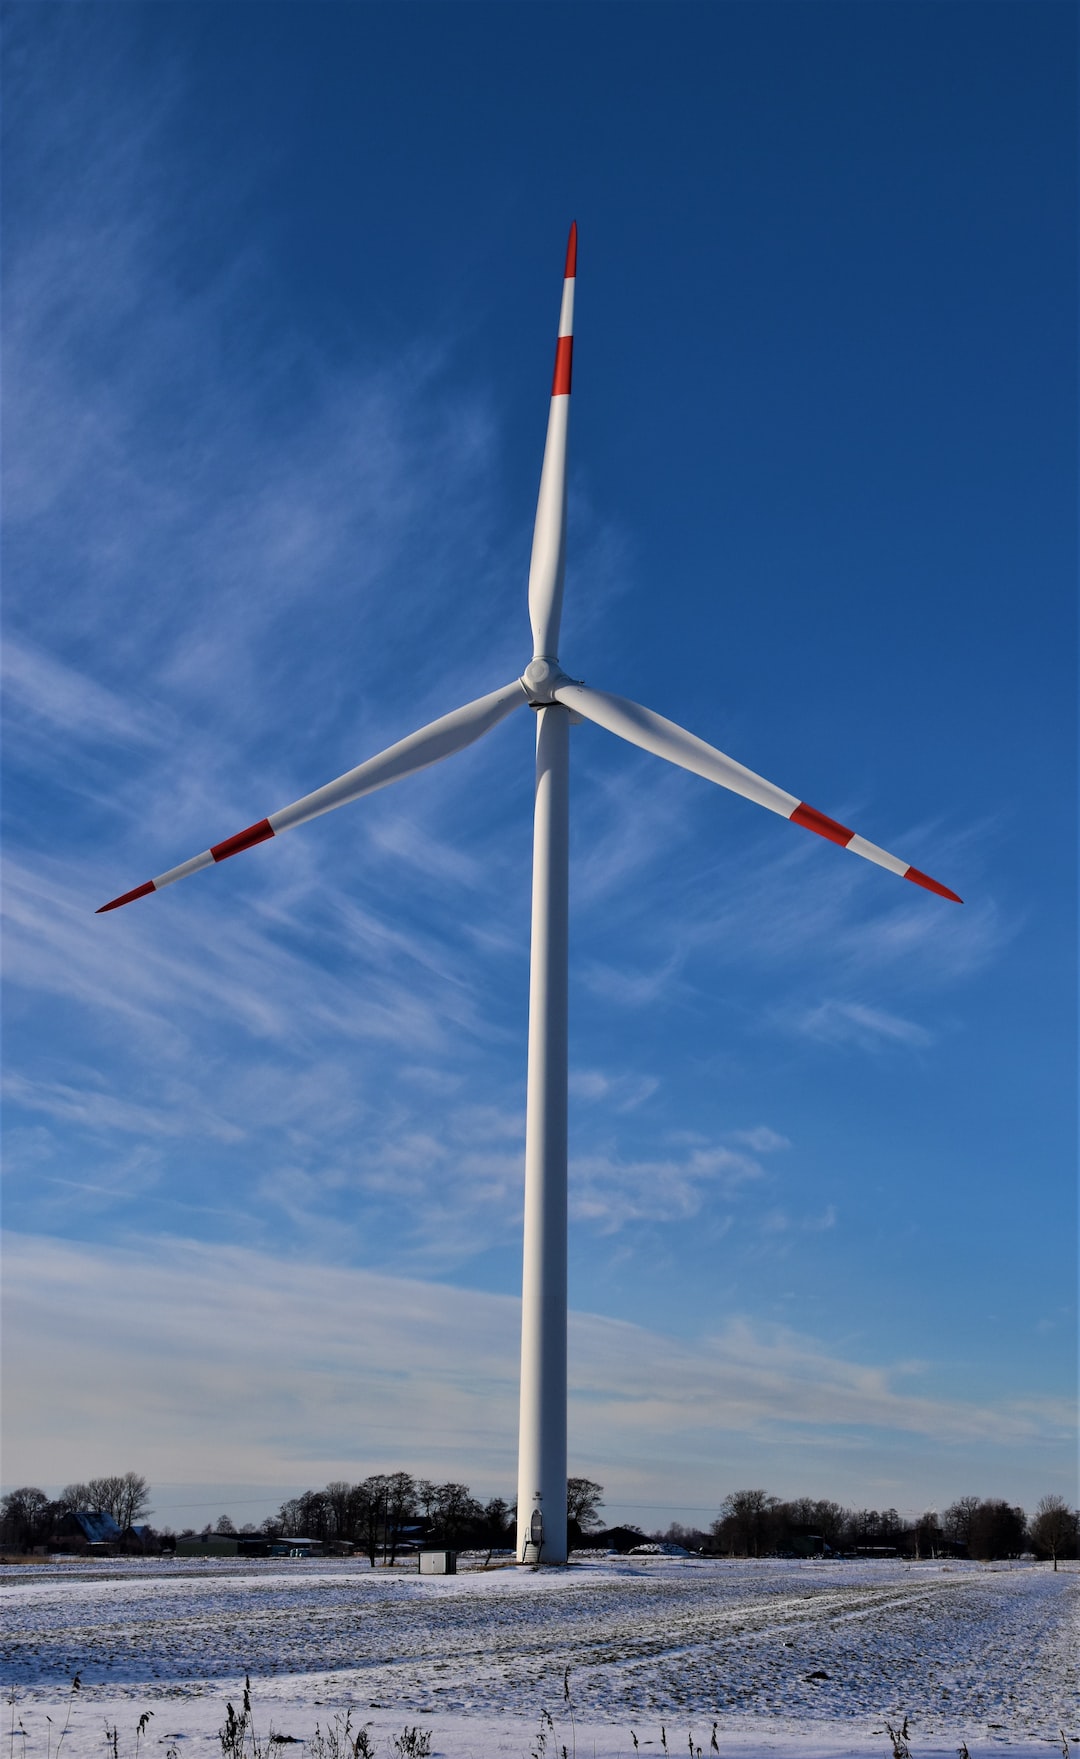 Wind Turbine Pin wheel in the blue sky and in the winter wonderland landscape